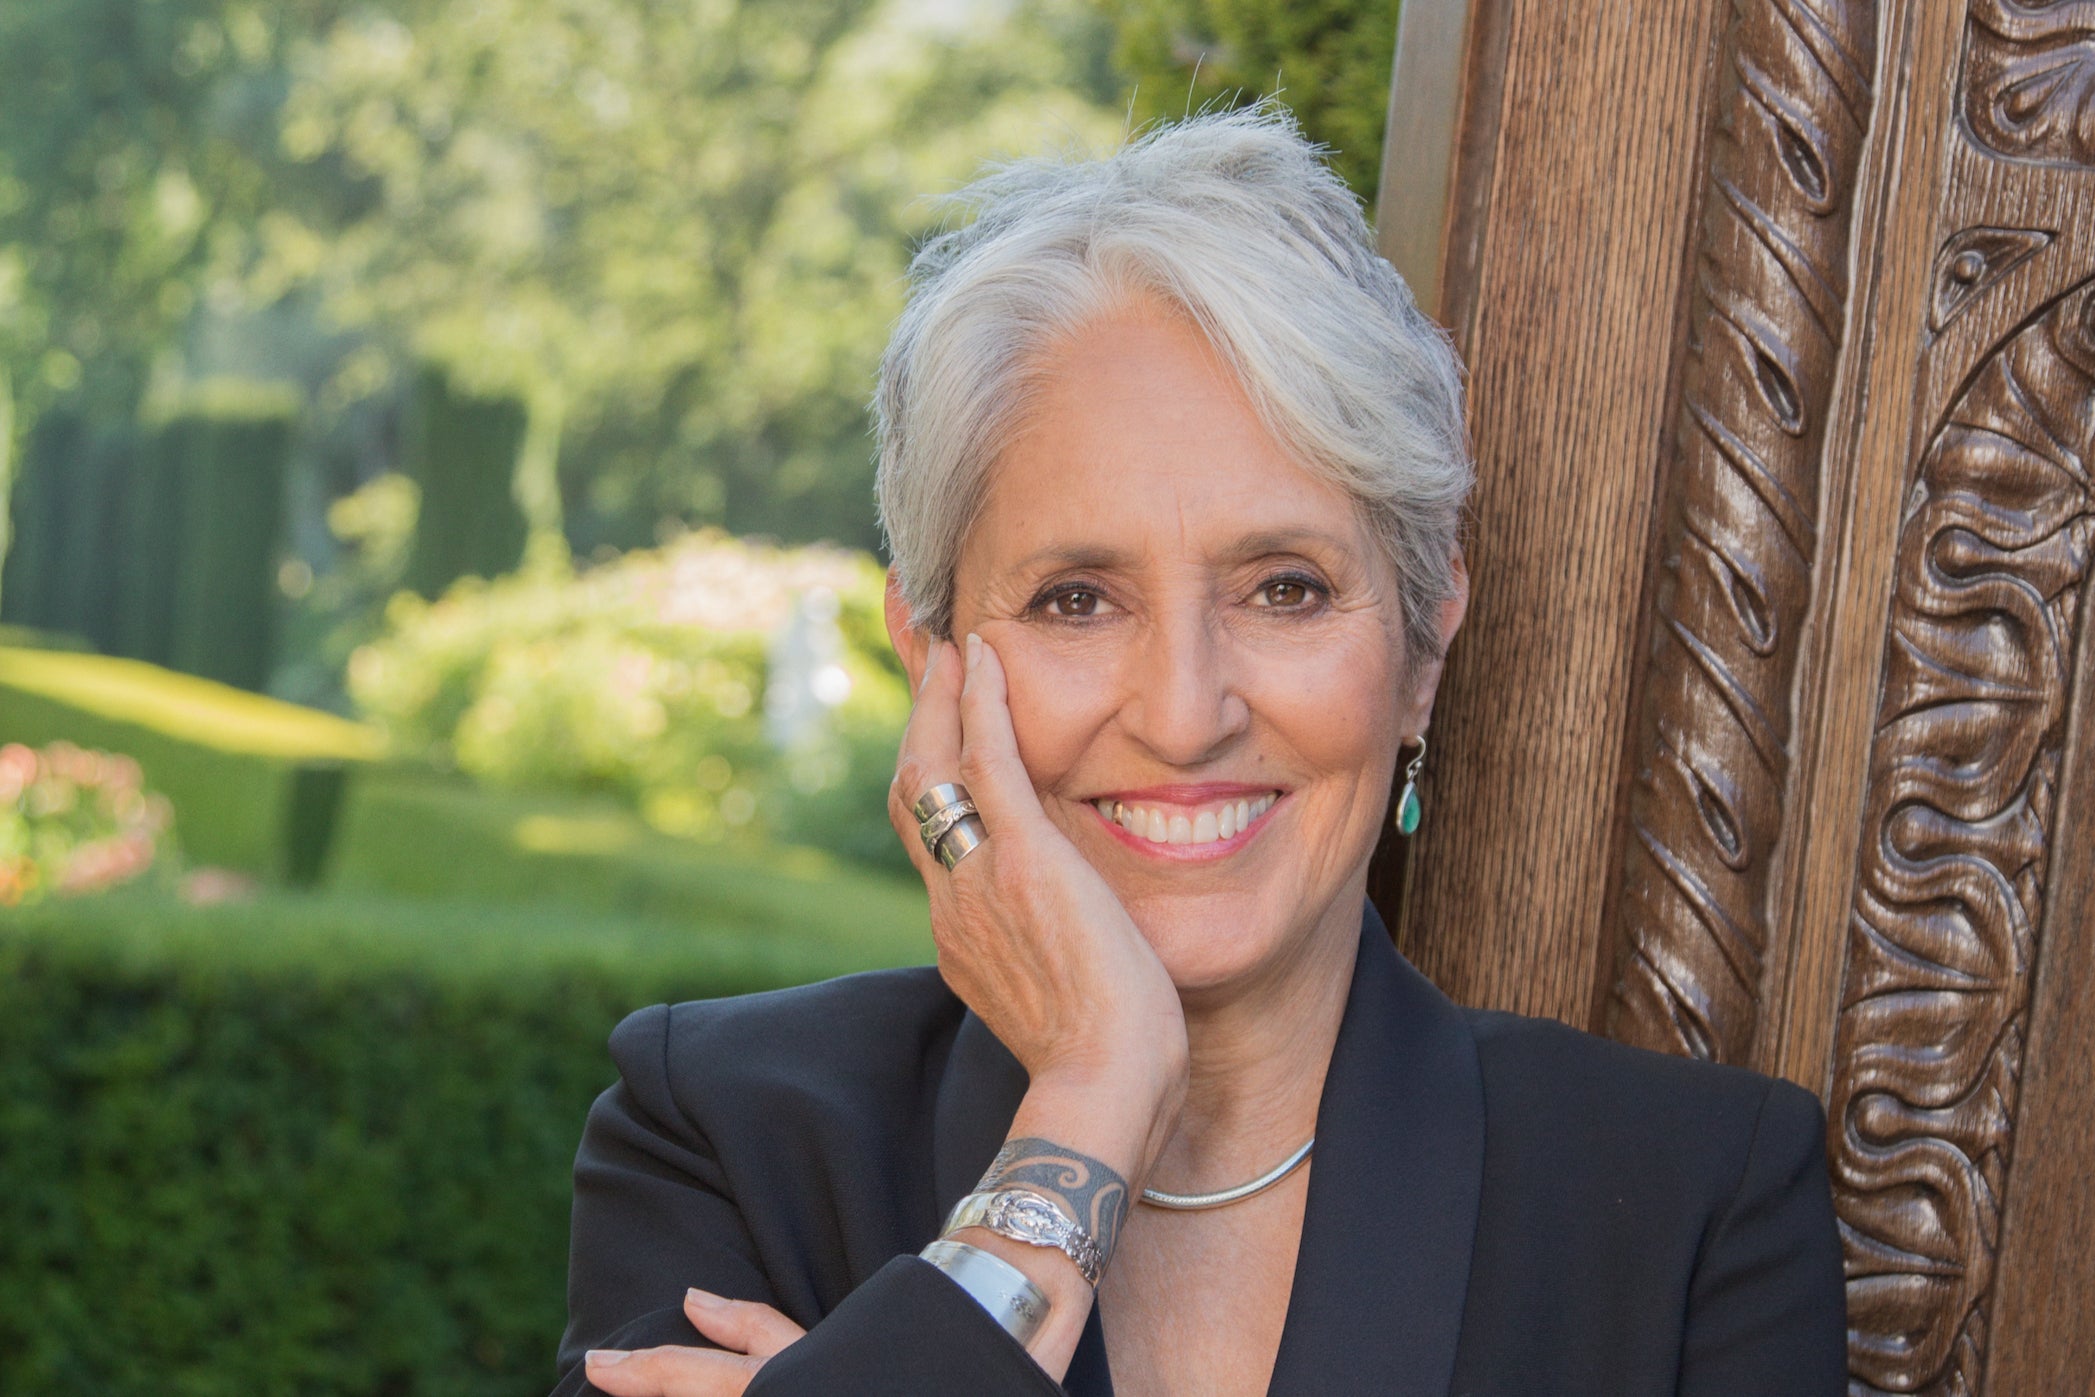 Joan Baez: ‘We’re fighting uphill against an avalanche of evil, sadism and bullying’